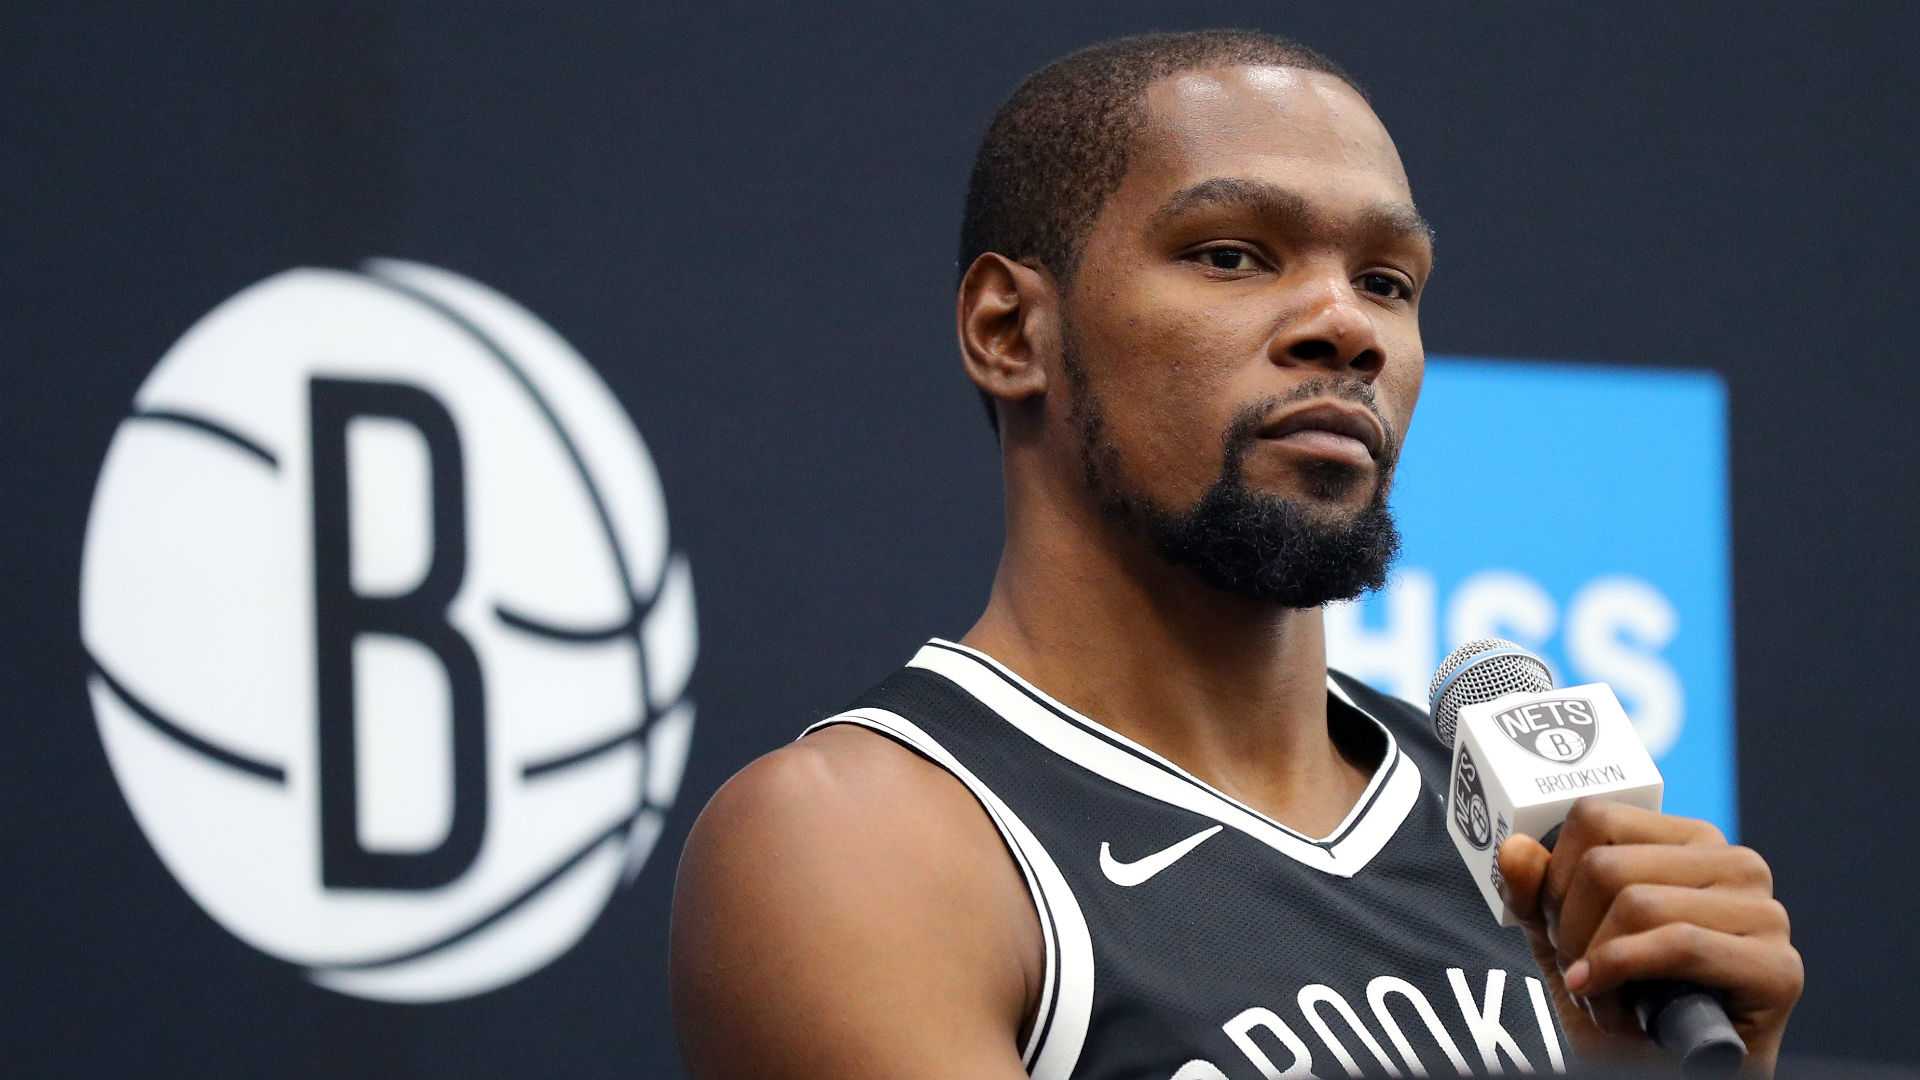  Kevin Durant Is Back to His MVP Ways